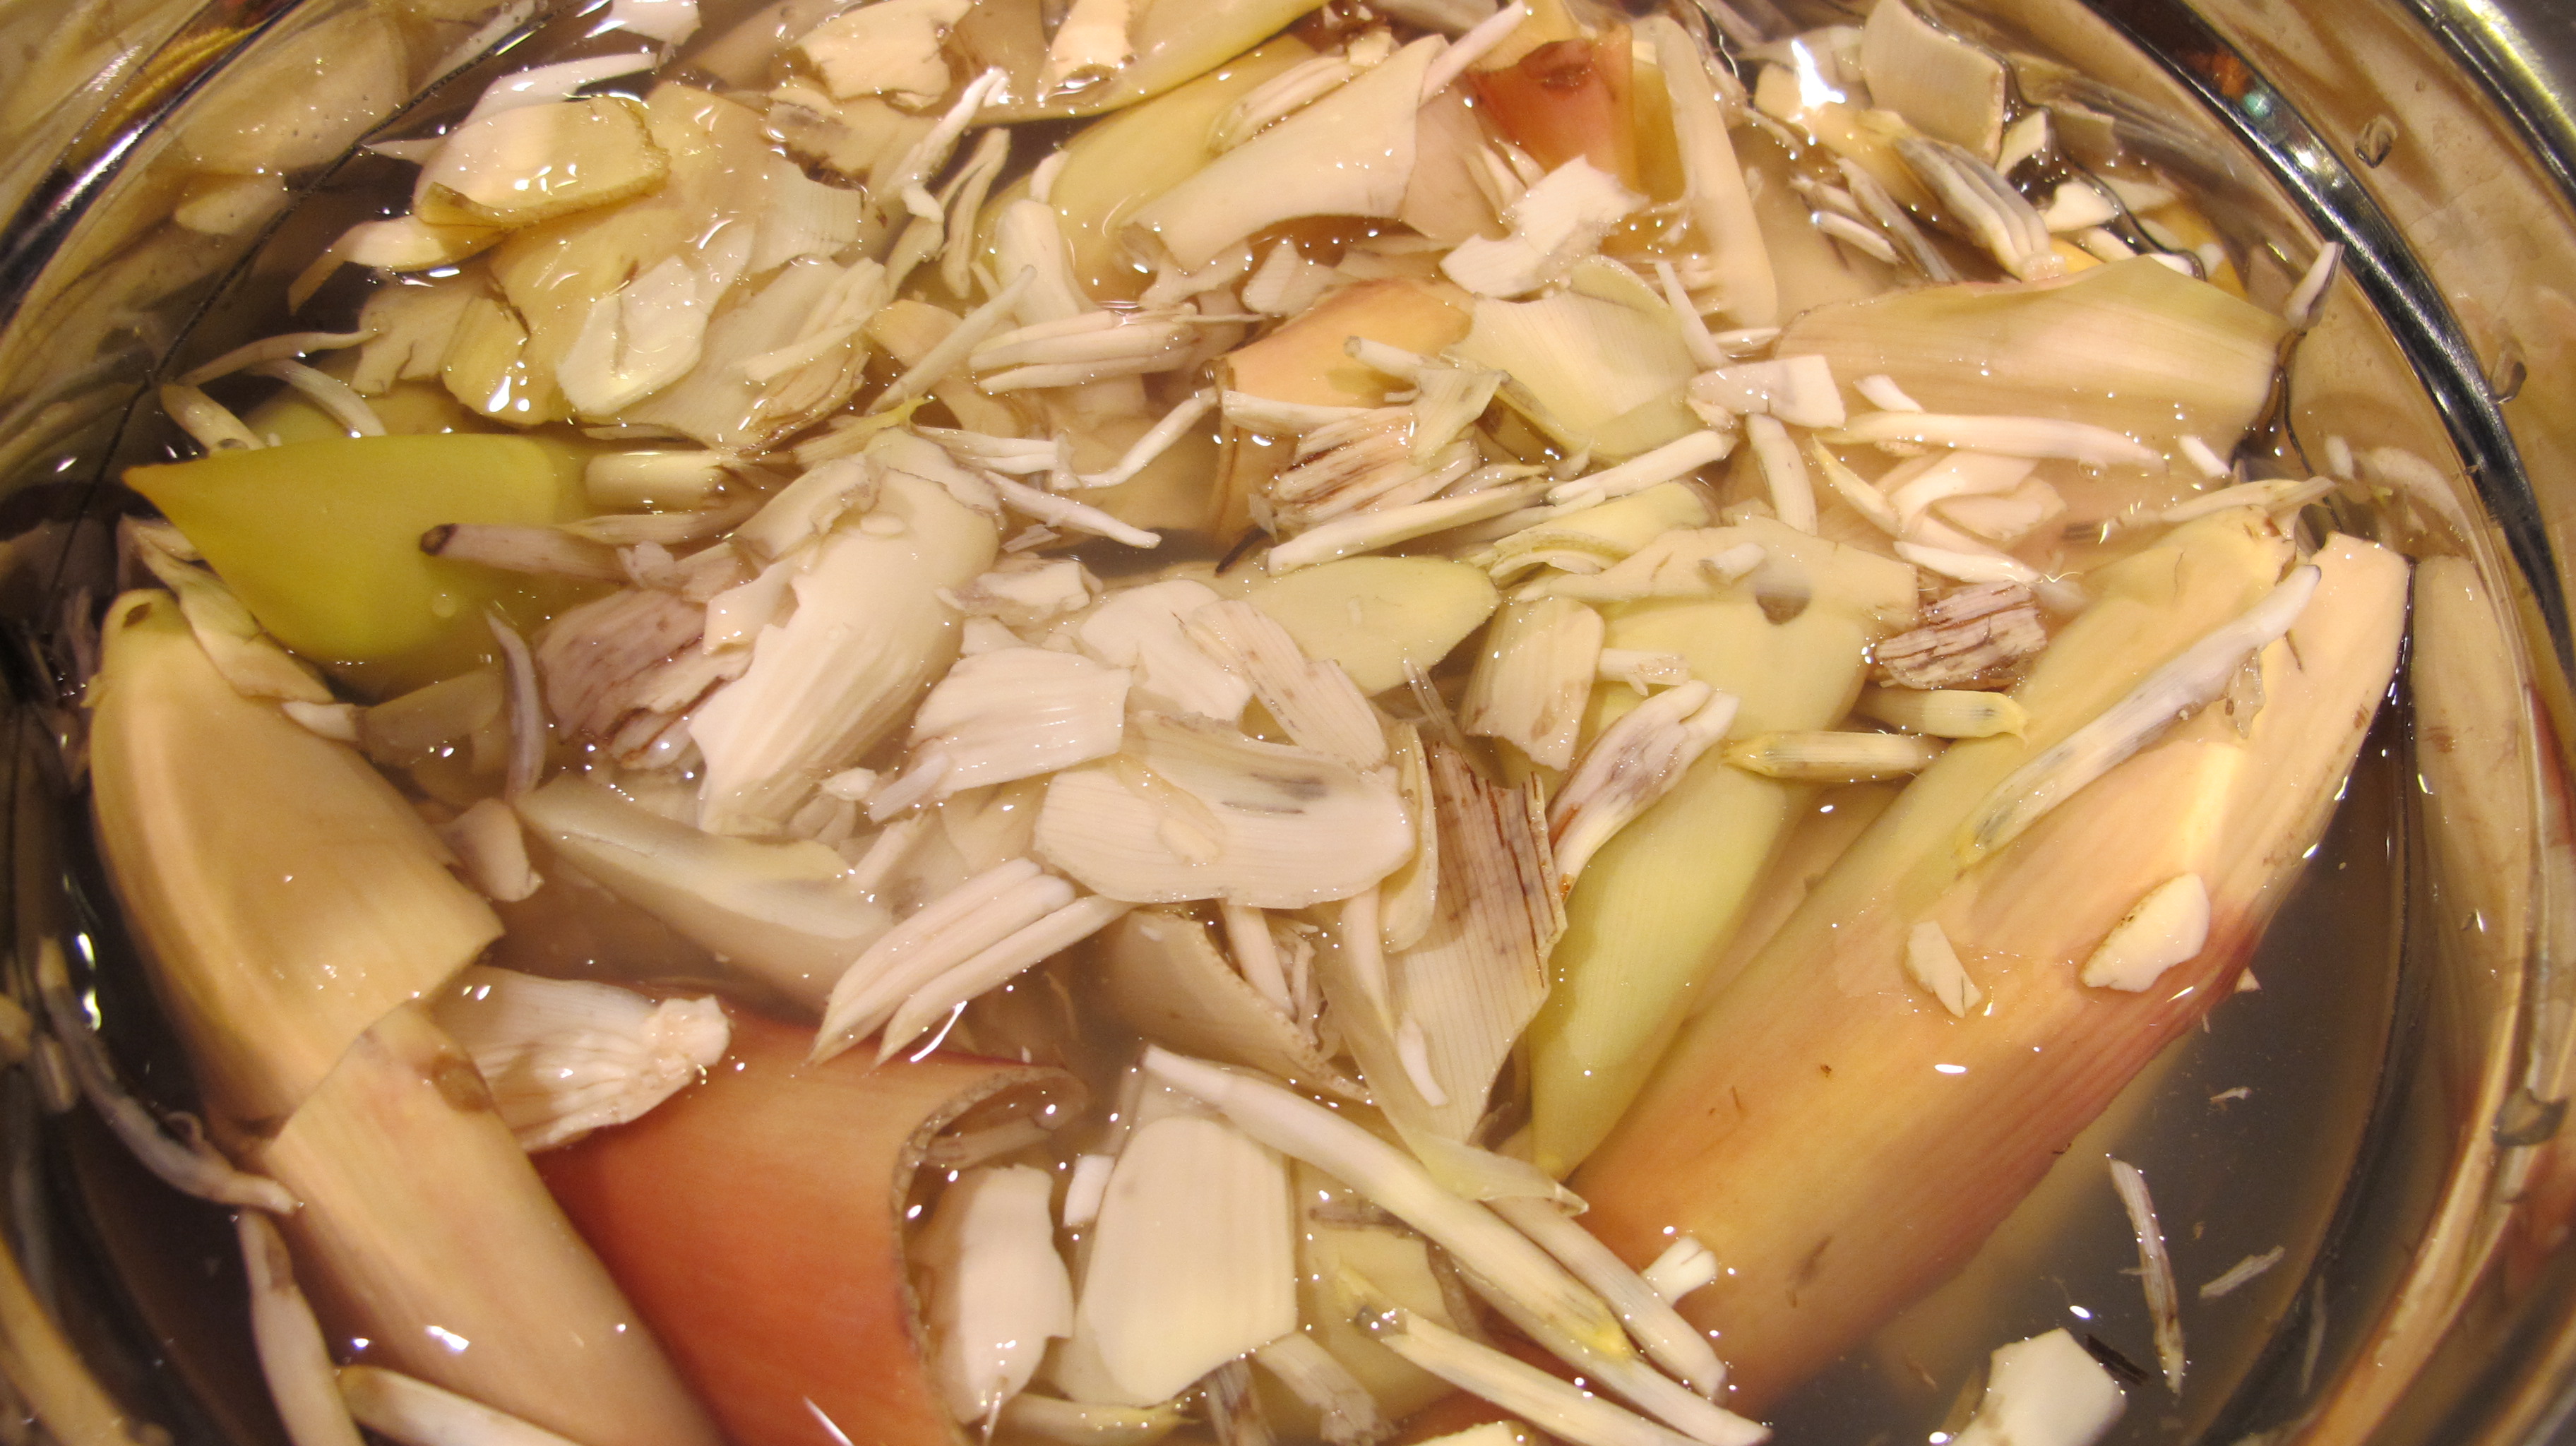 The banana flower soaks in lemon water before being cut to serve. 